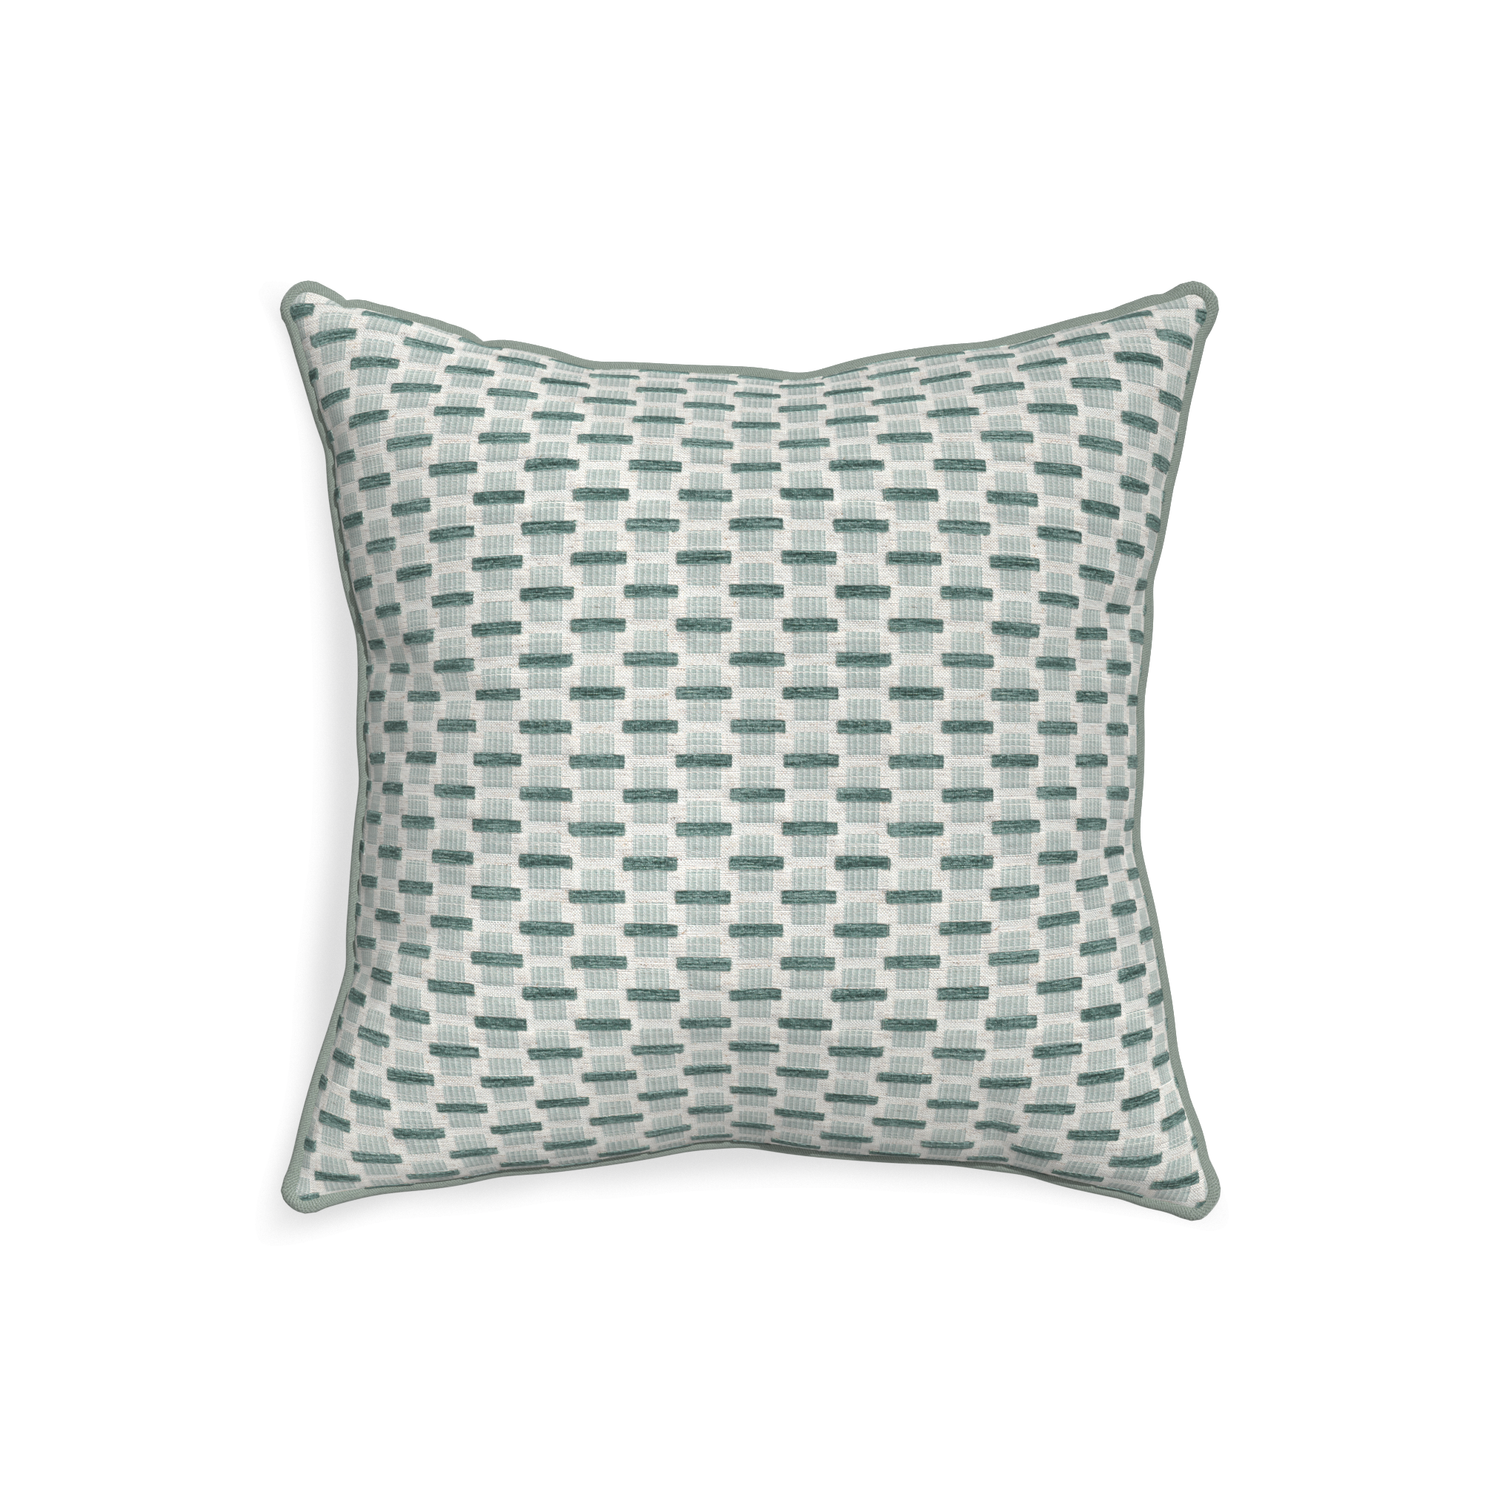 20-square willow mint custom green geometric chenillepillow with sage piping on white background